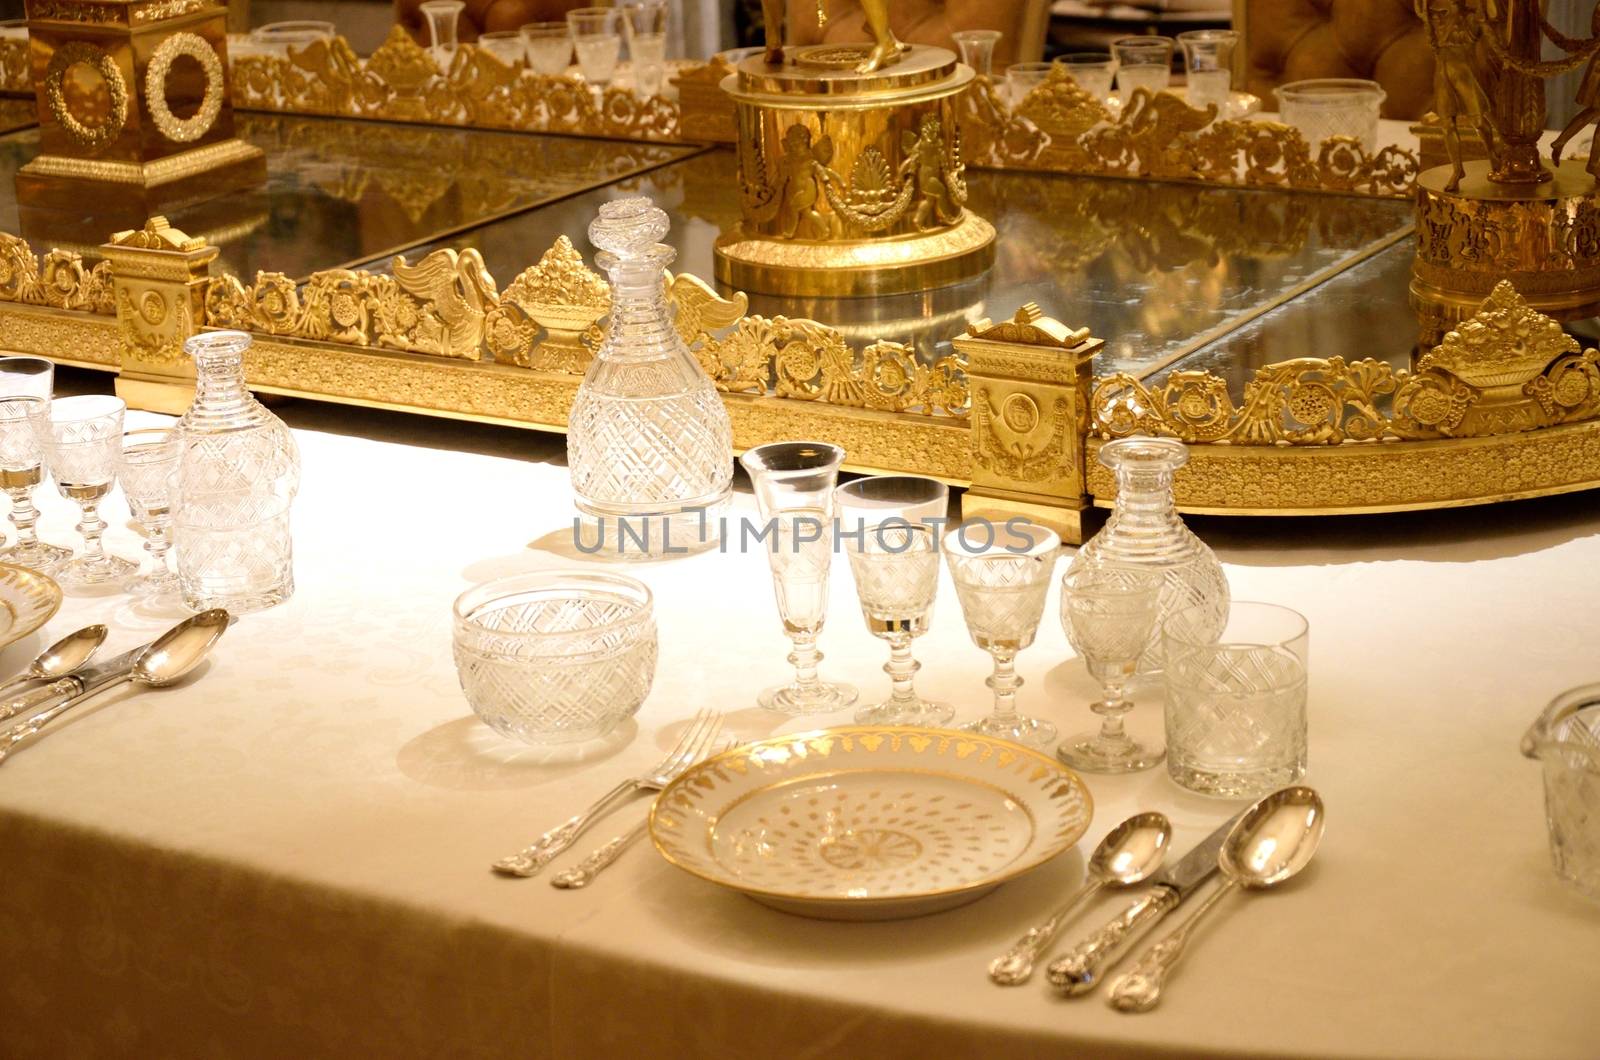 Aristocratic table set up in stately home